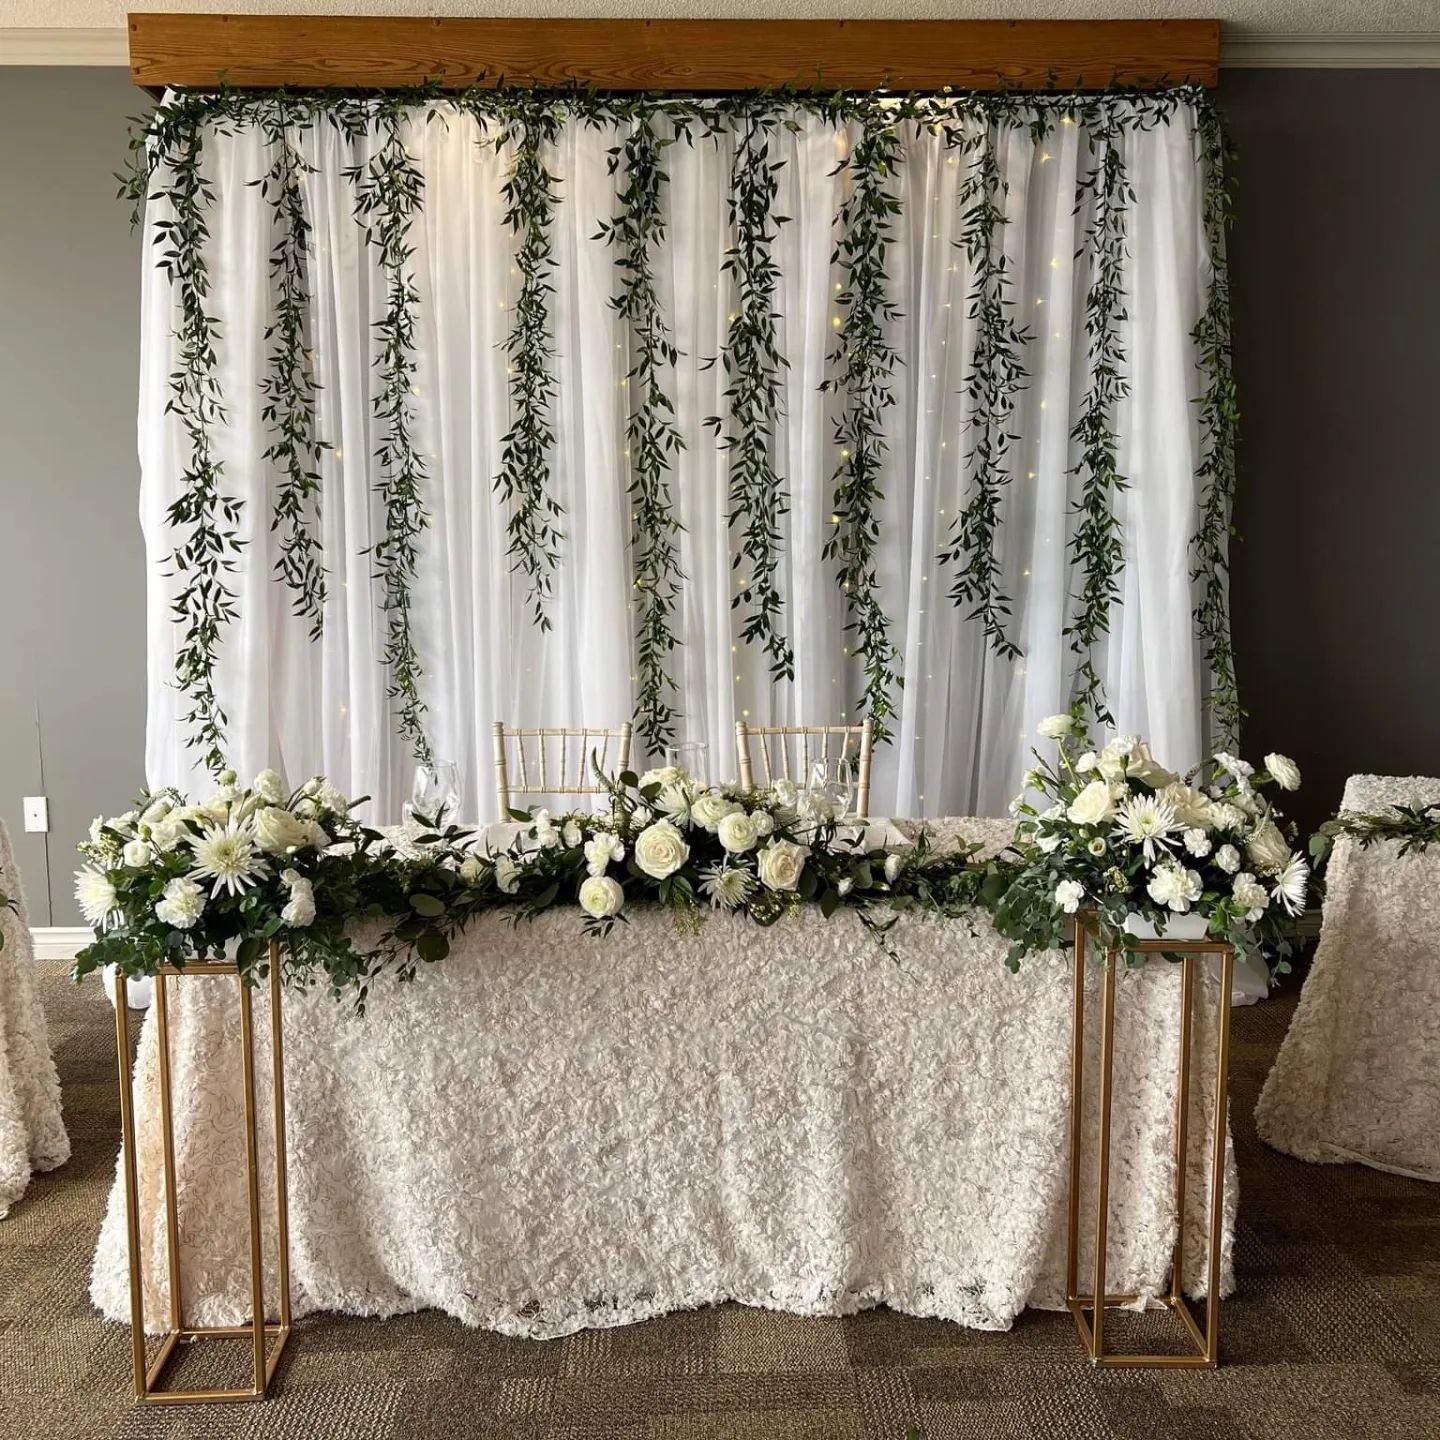 Bridal head table sweetheart reception table with flowers